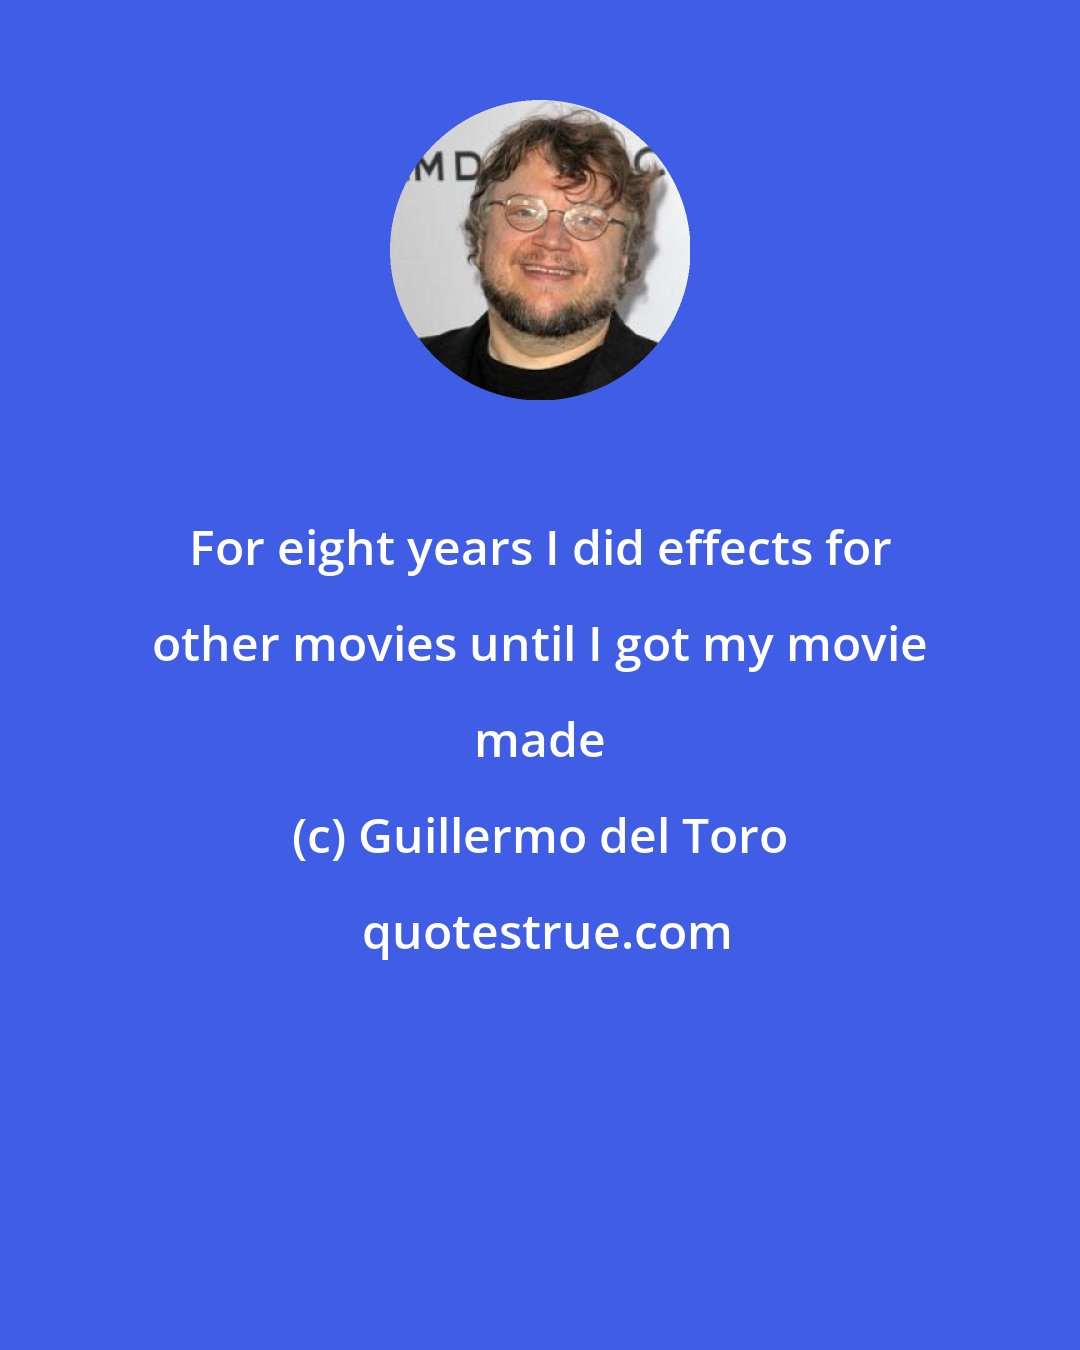 Guillermo del Toro: For eight years I did effects for other movies until I got my movie made